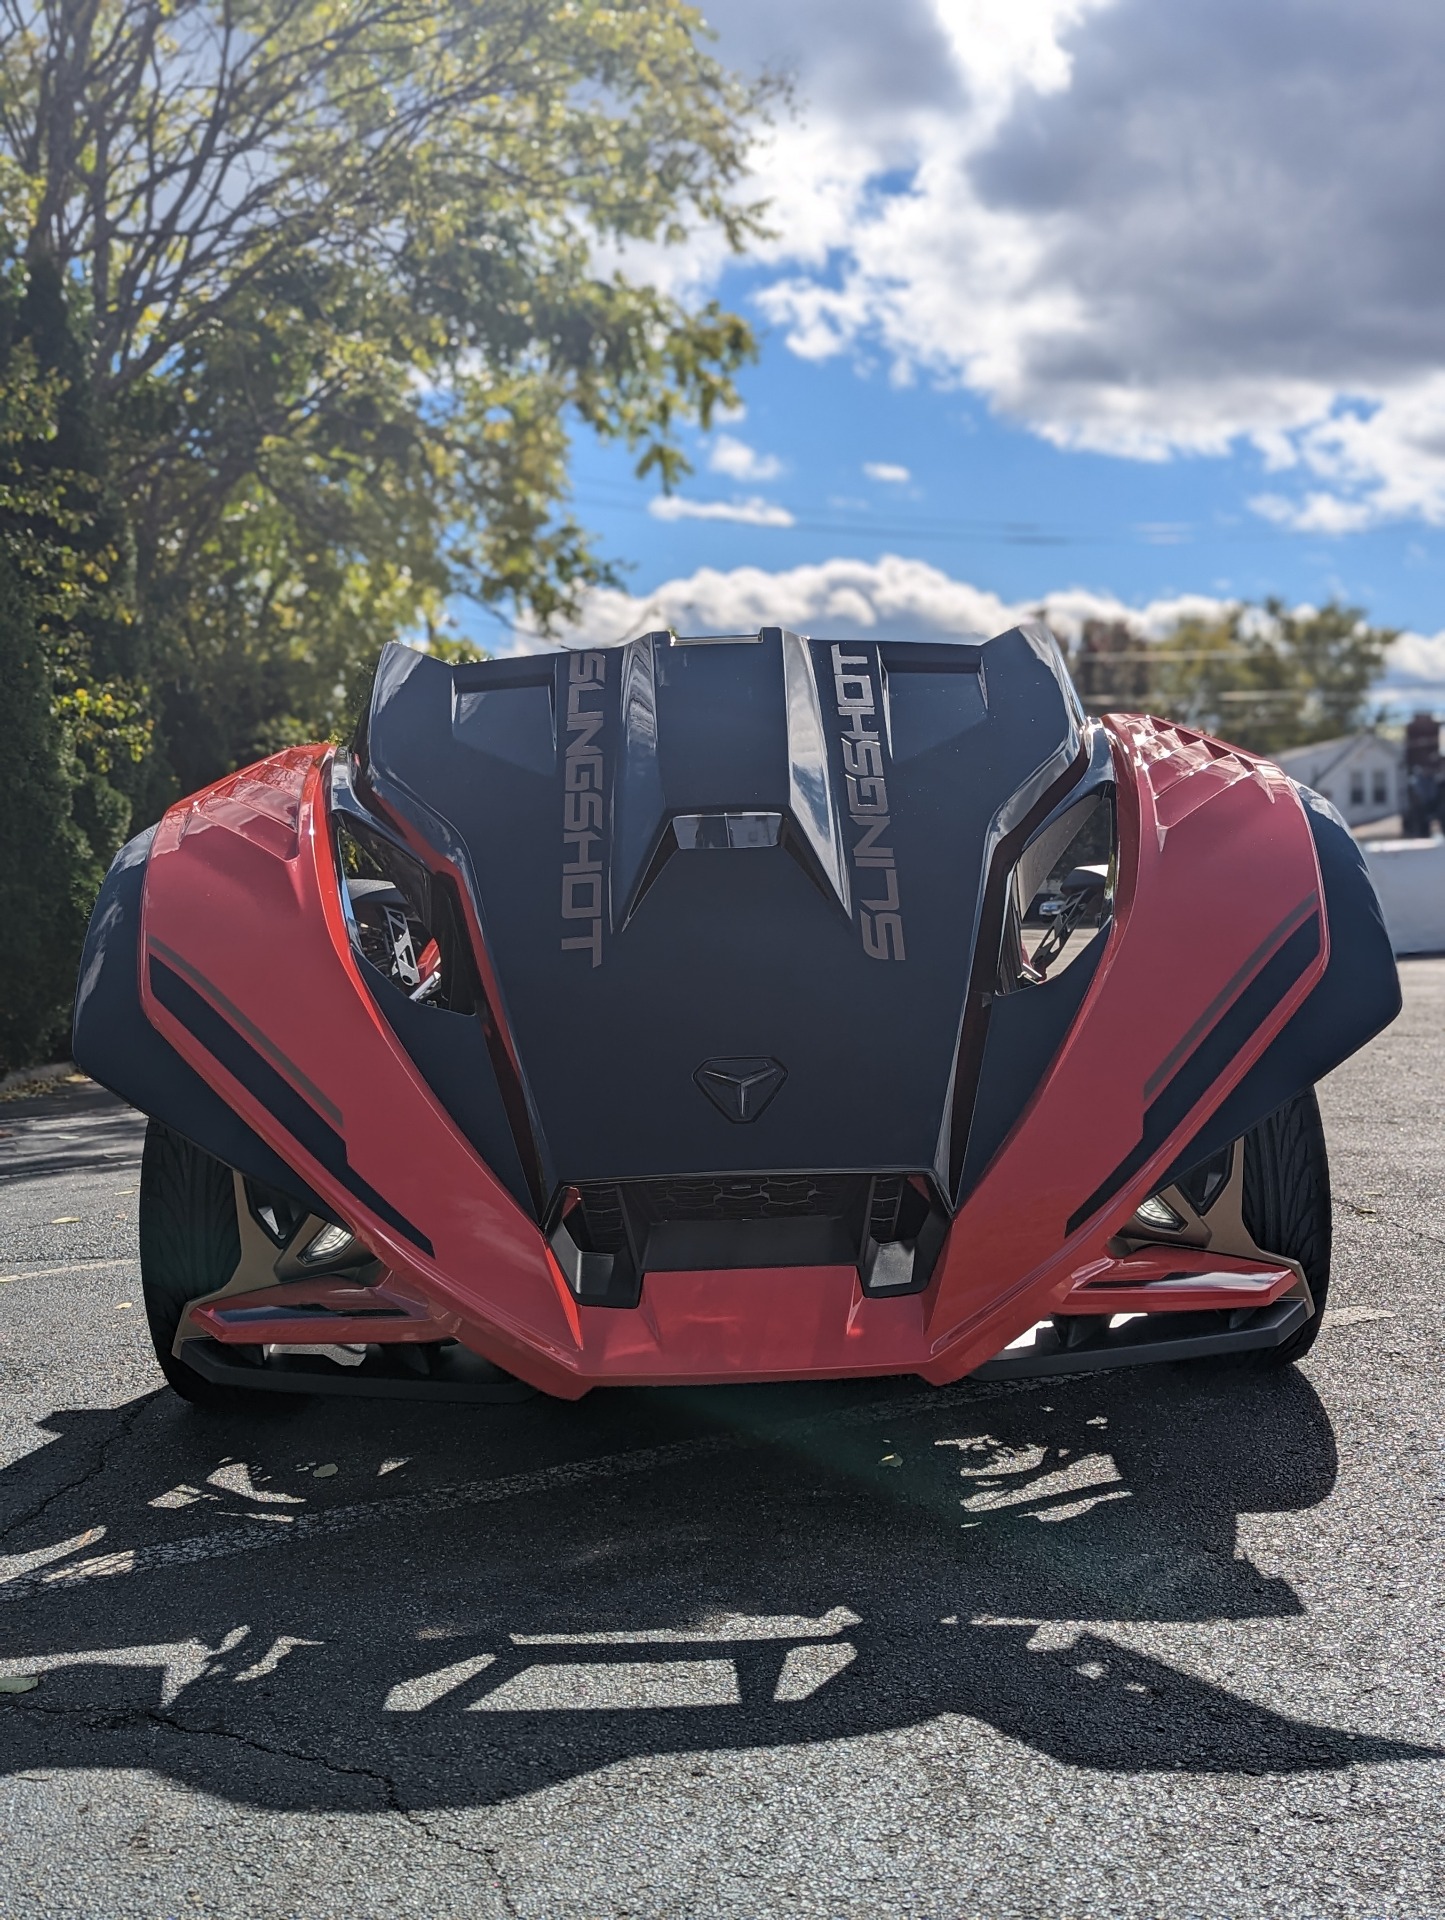 2022 Slingshot Signature Limited Edition AutoDrive in Mahwah, New Jersey - Photo 7